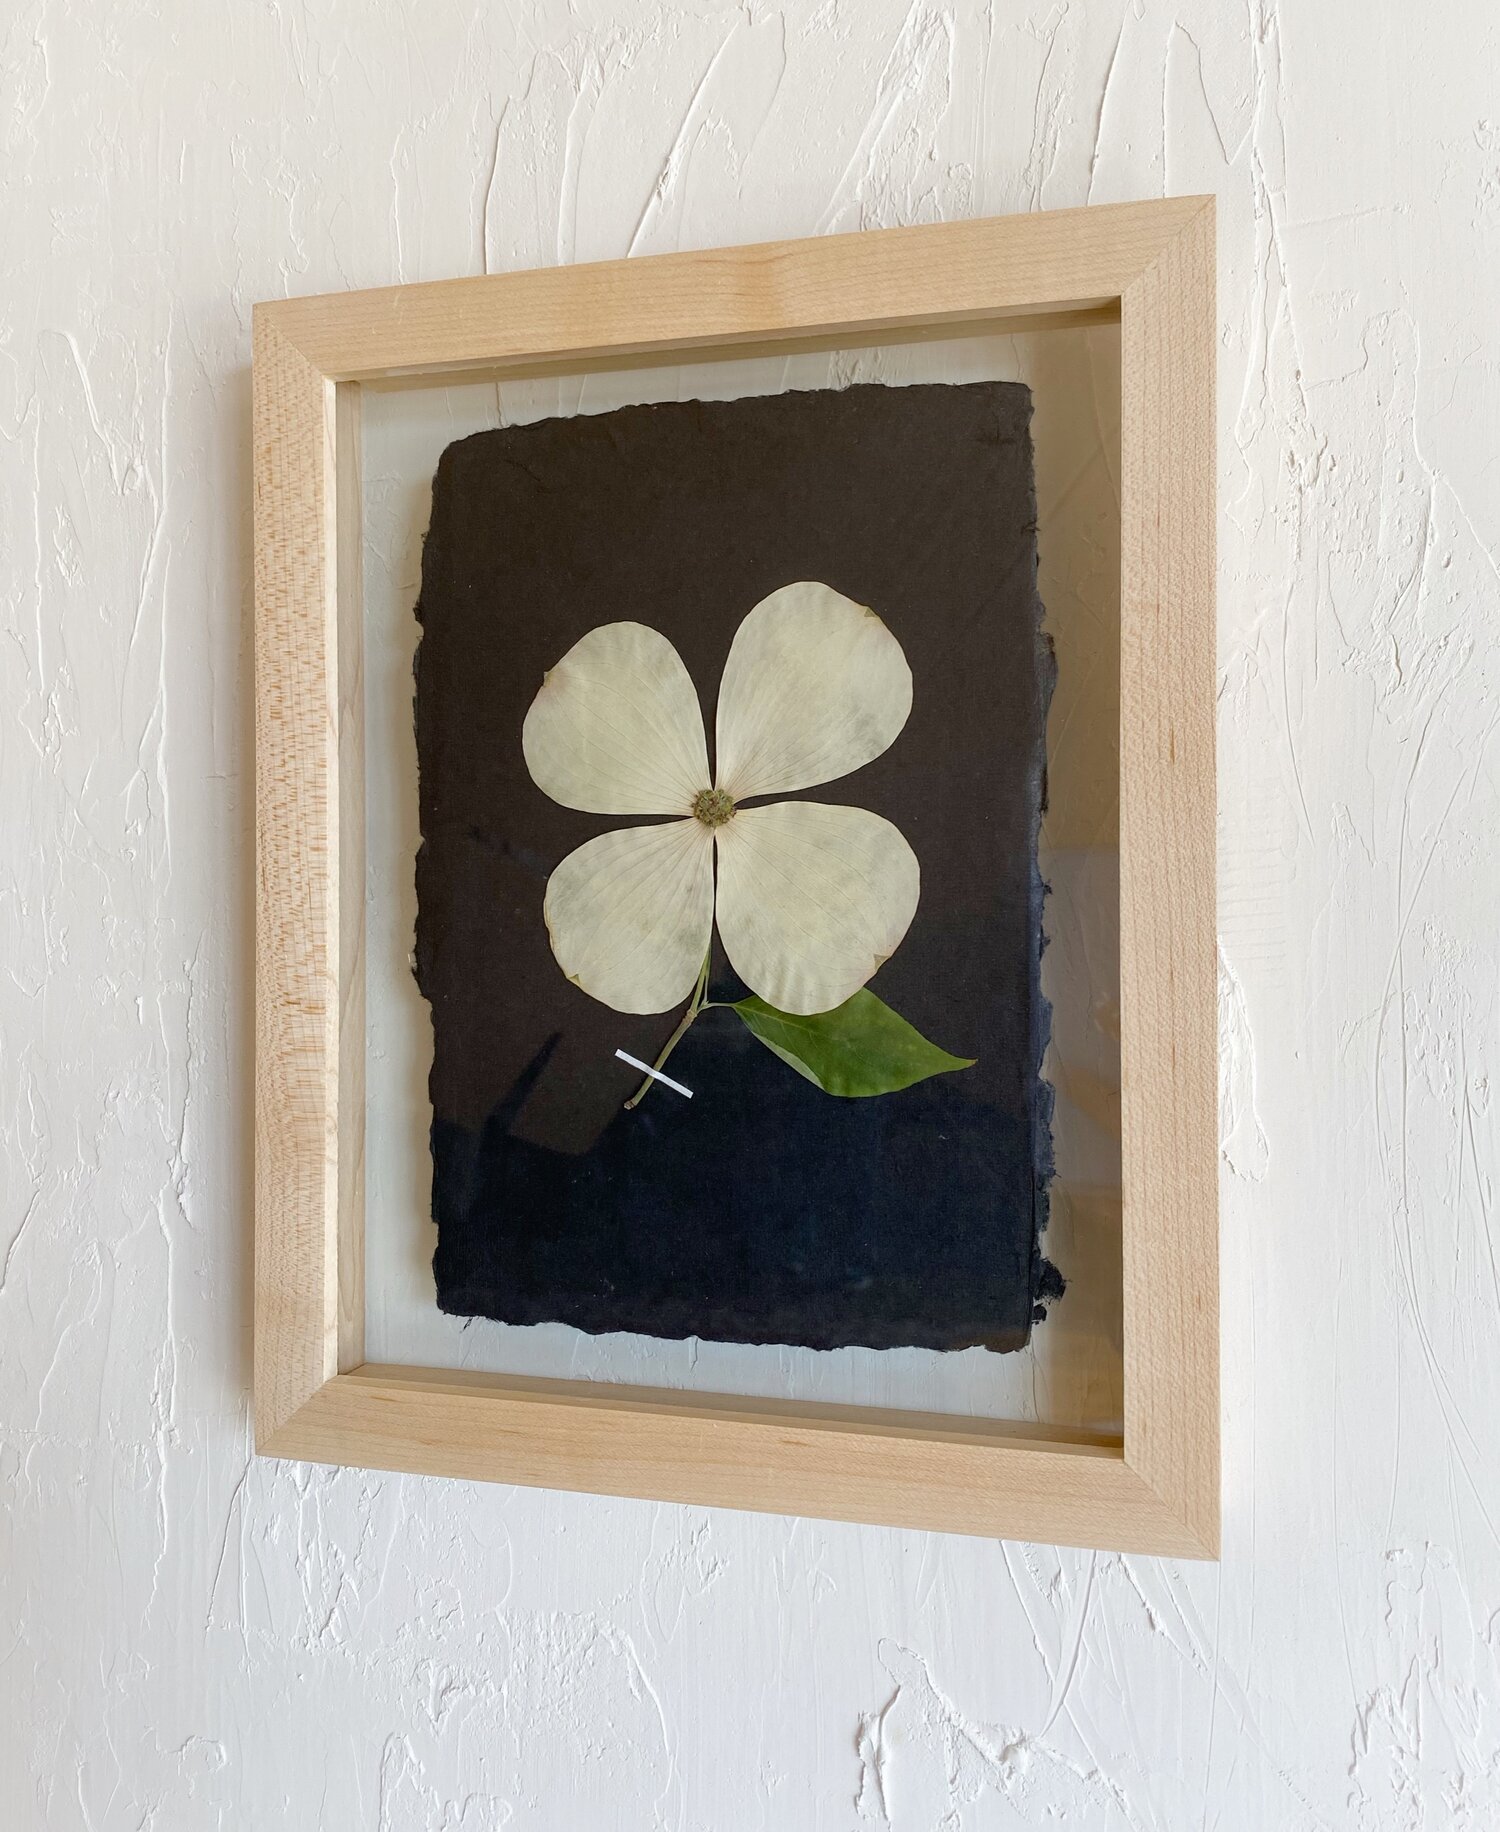 Real Pressed Maple Leaf and Shamrock Framed Picture Wall Art